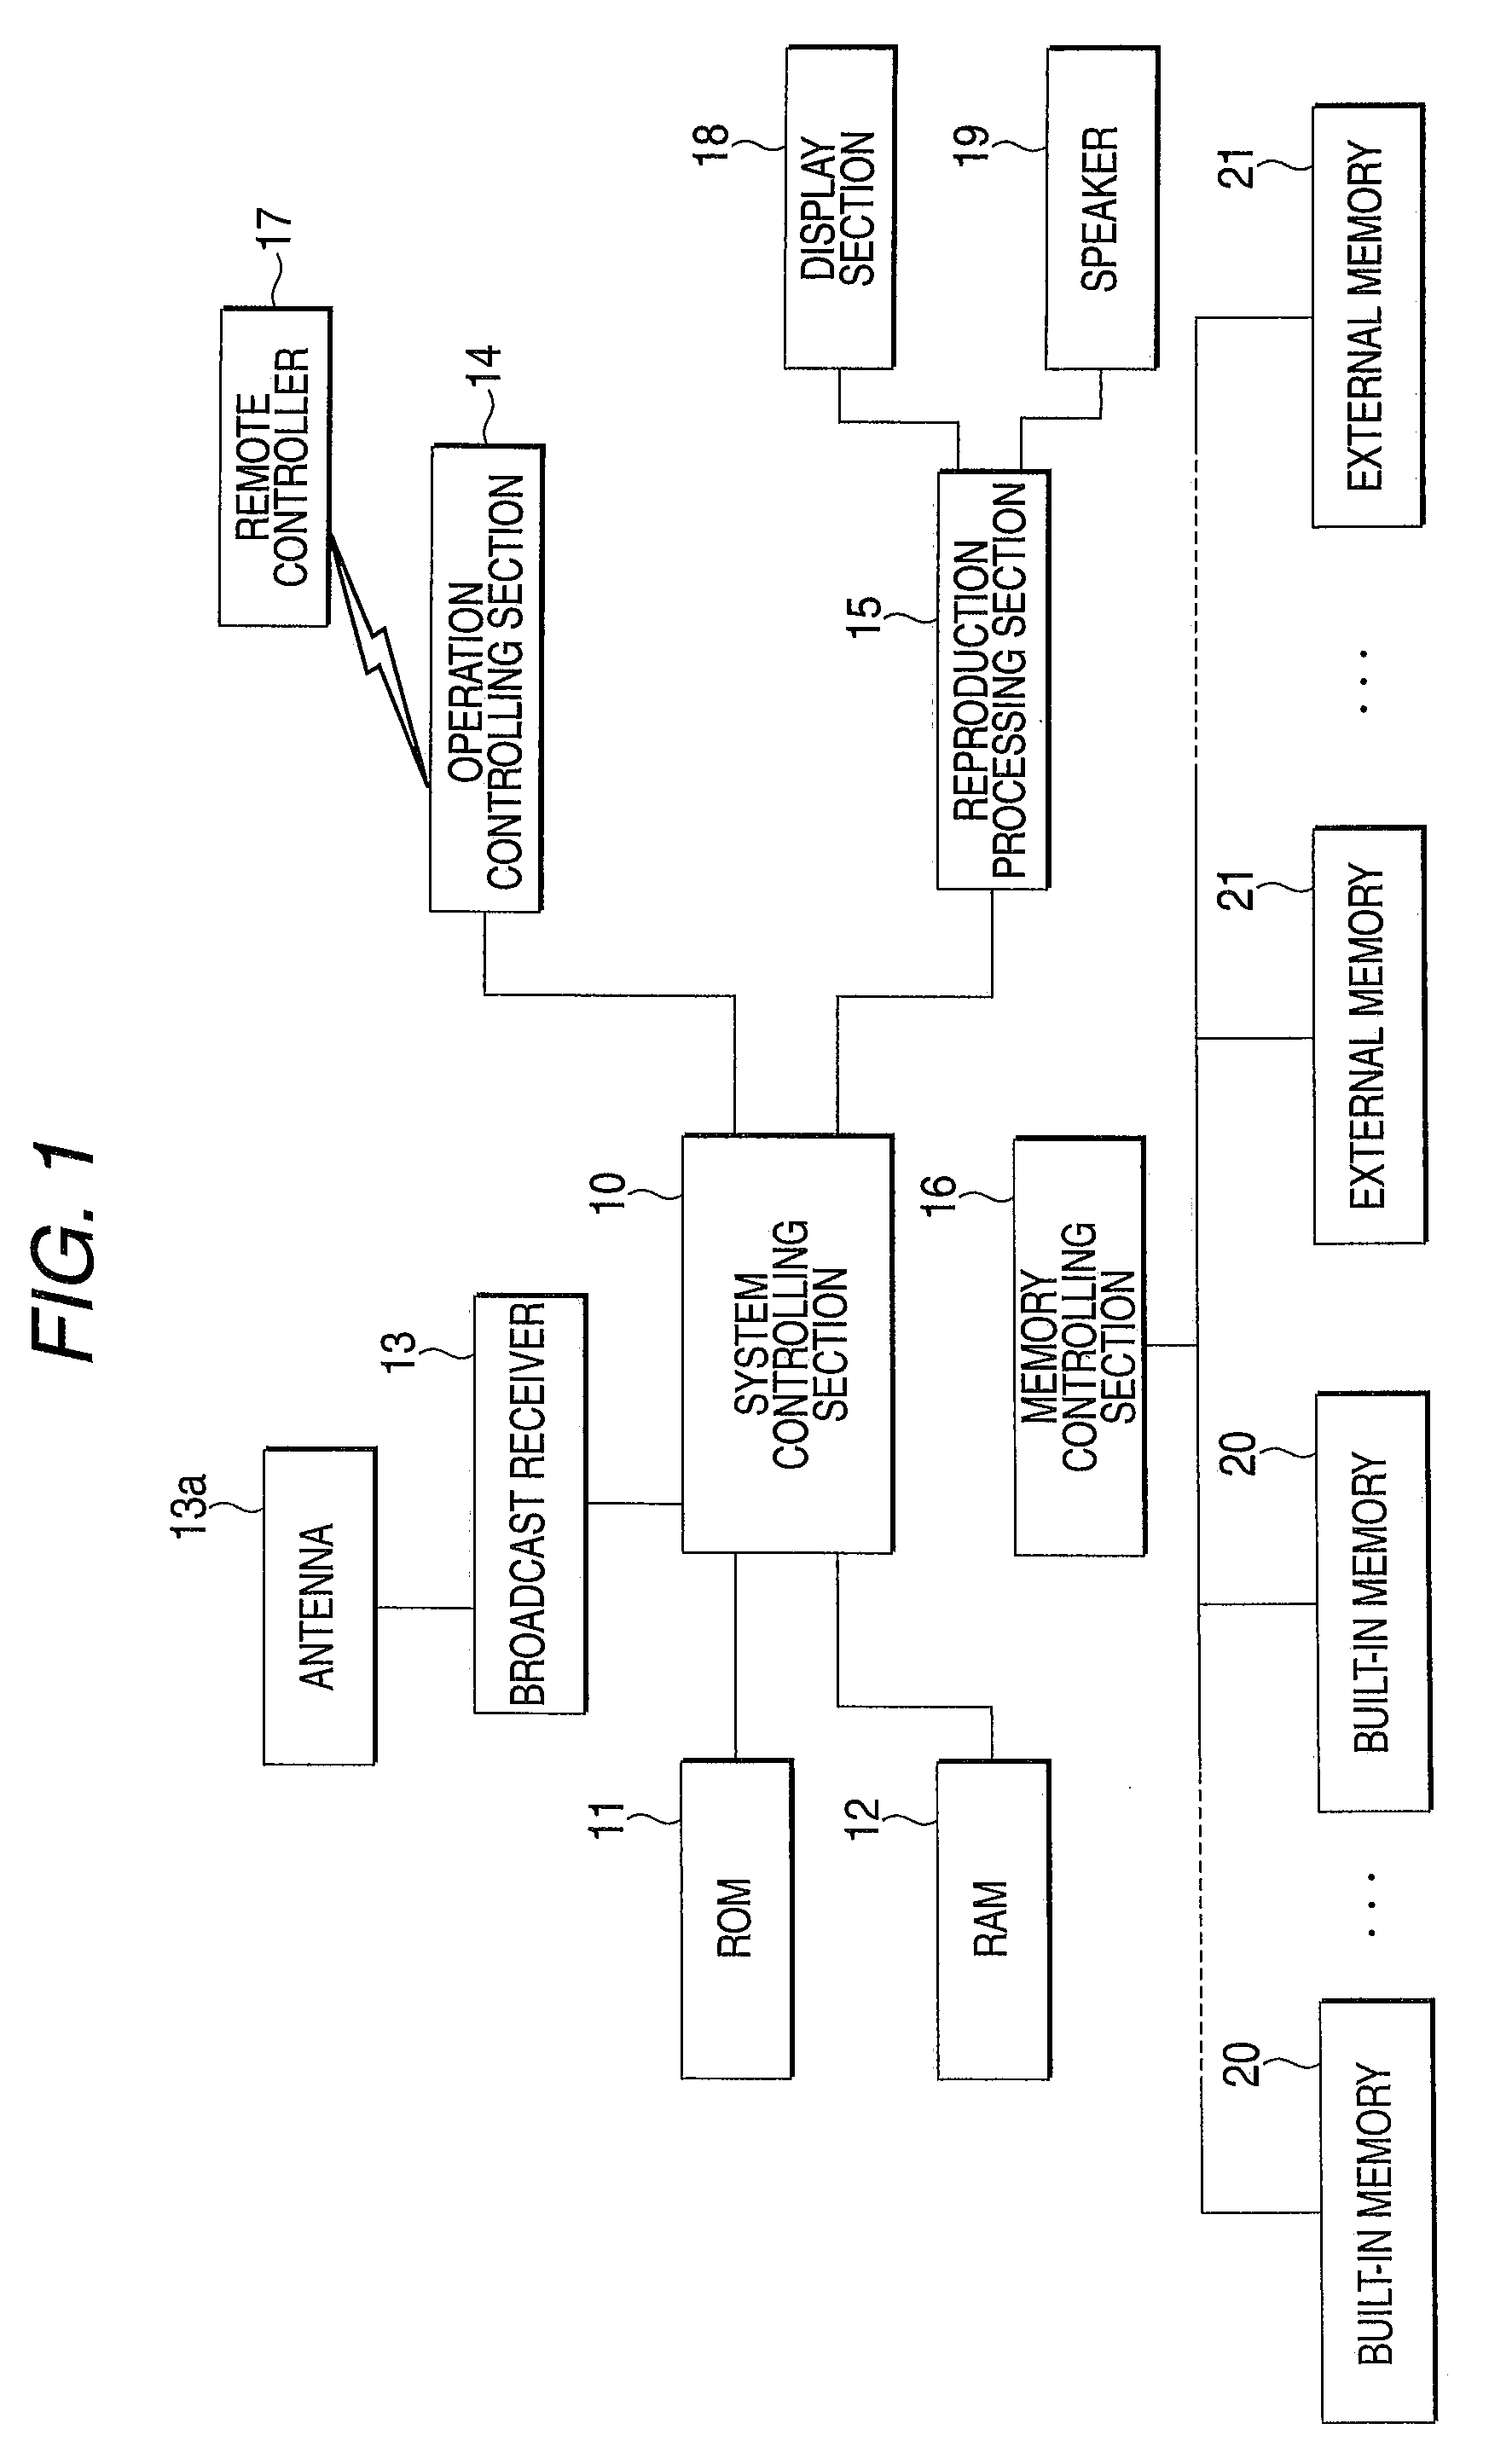 Stored program controlling apparatus and method of controlling stored program